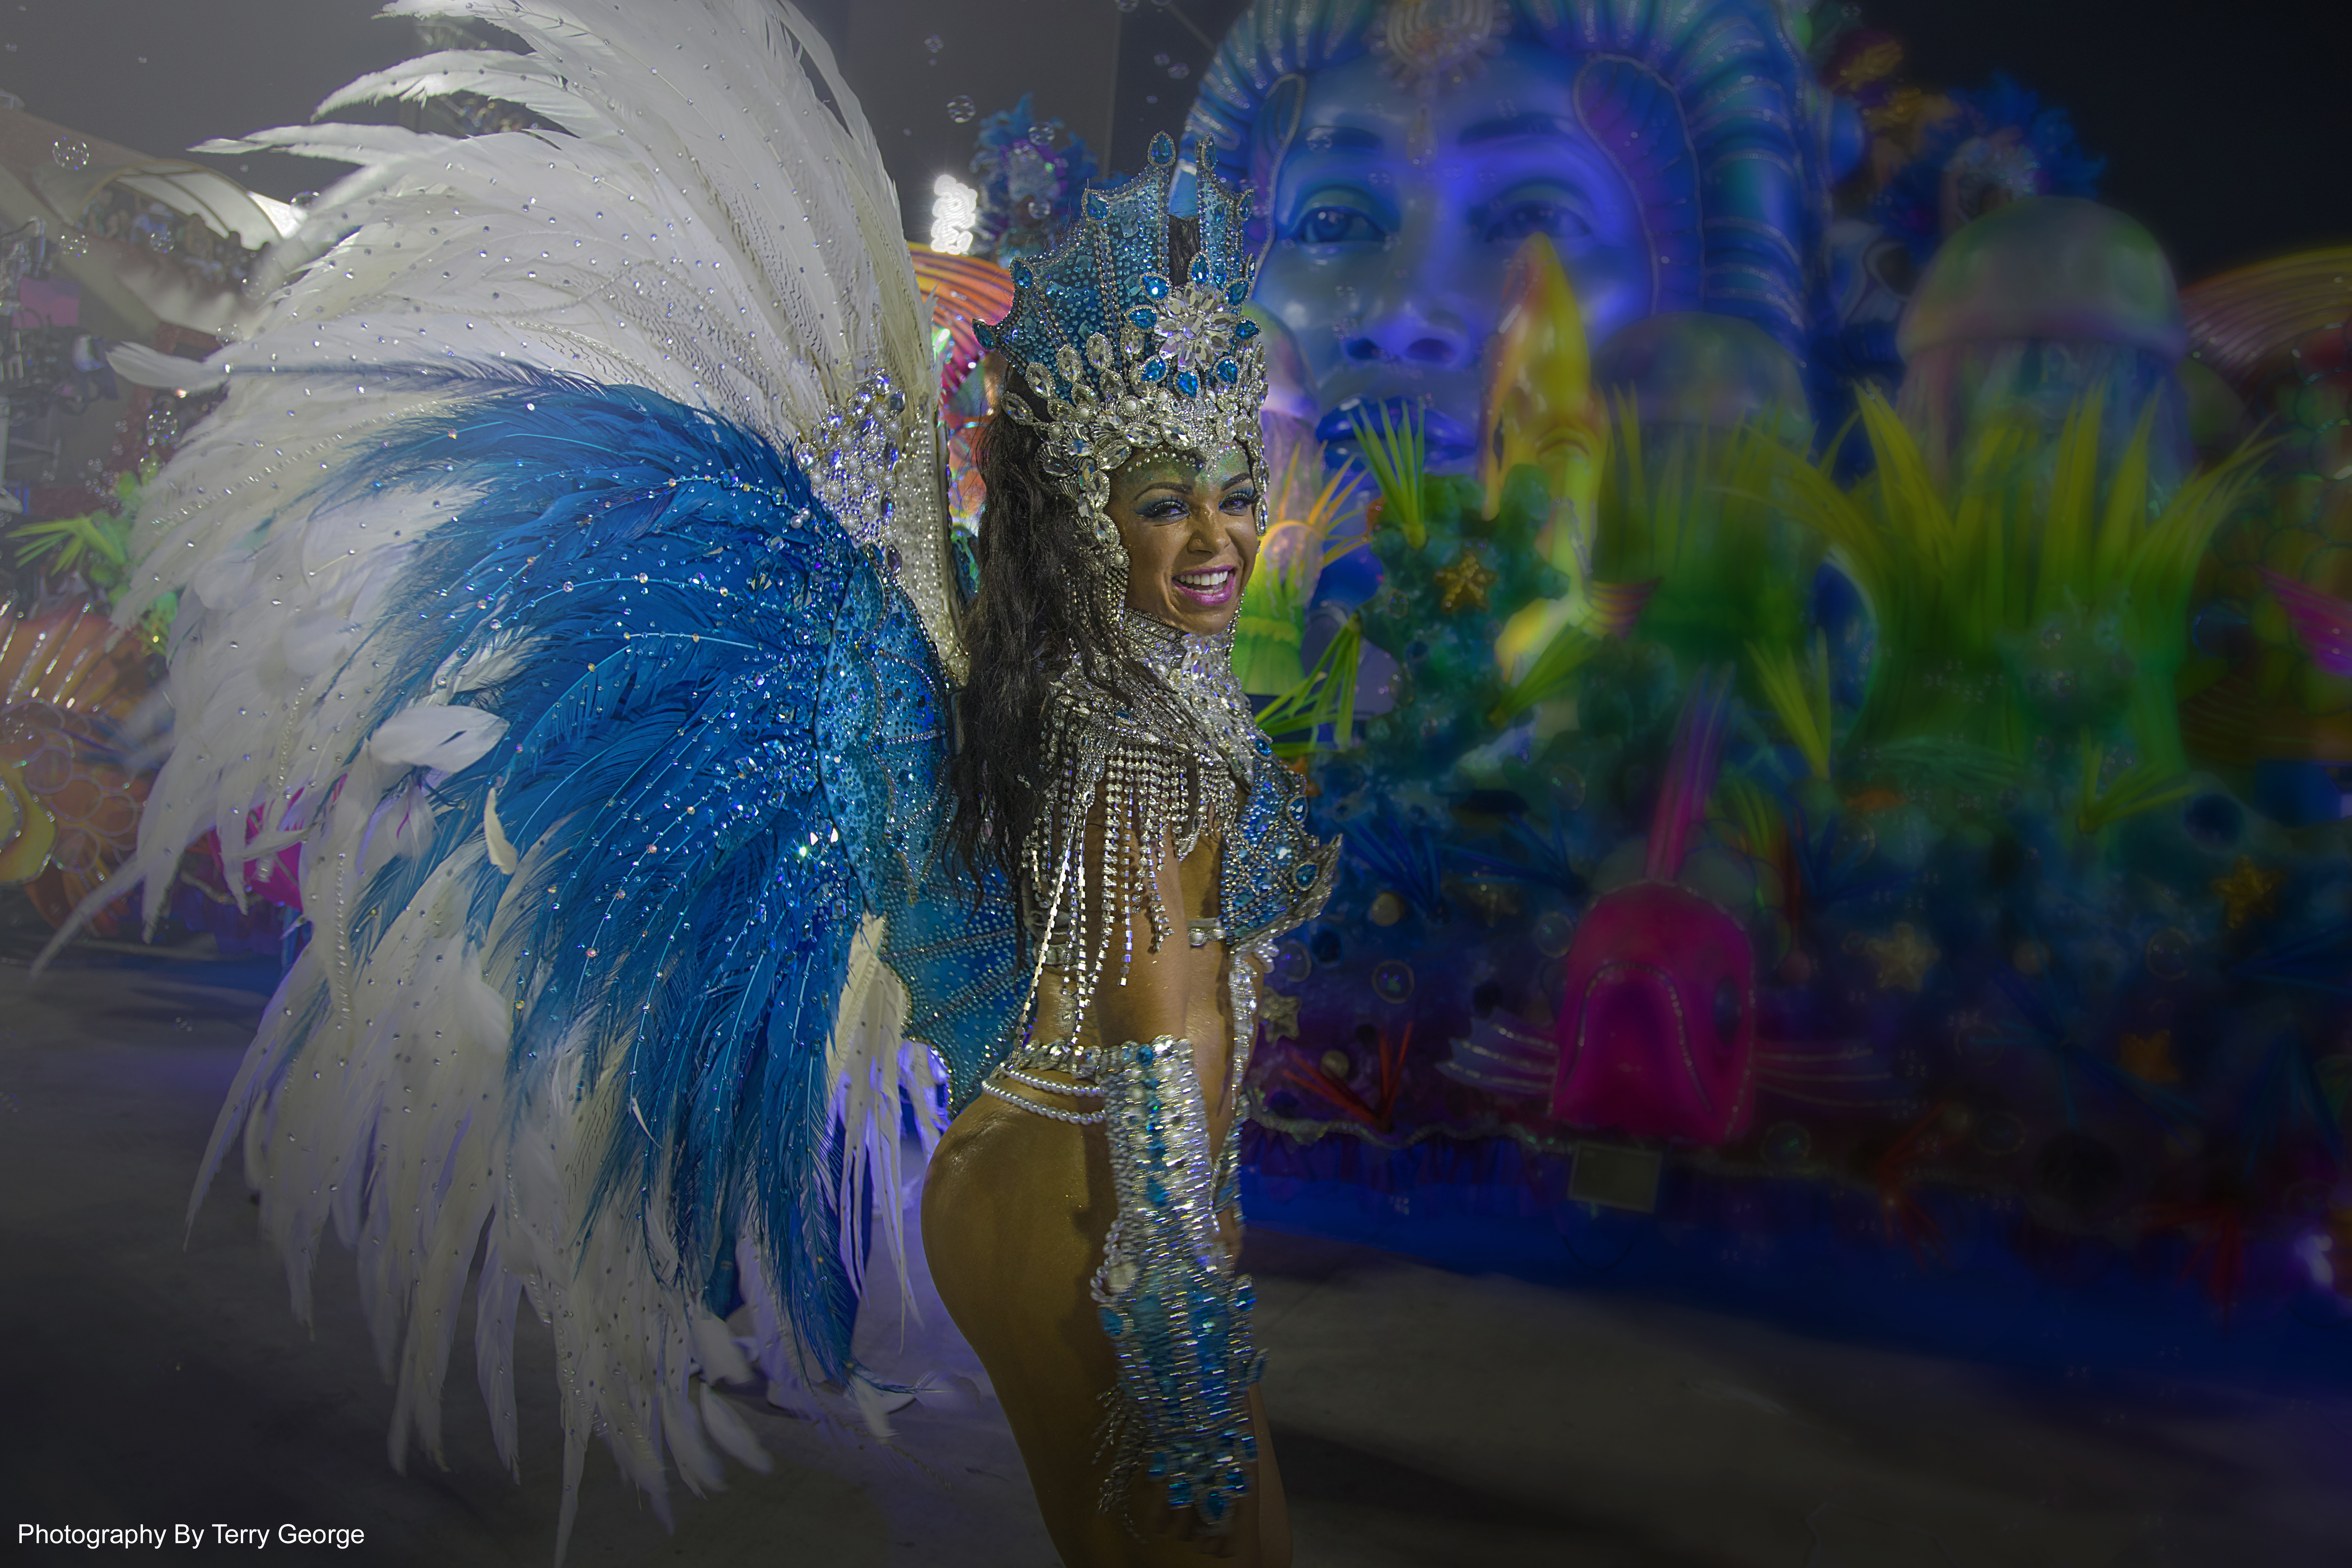 Rio de Janeiro’s Carnival - 7 Festivals From Around The World To Add To Your Bucket List